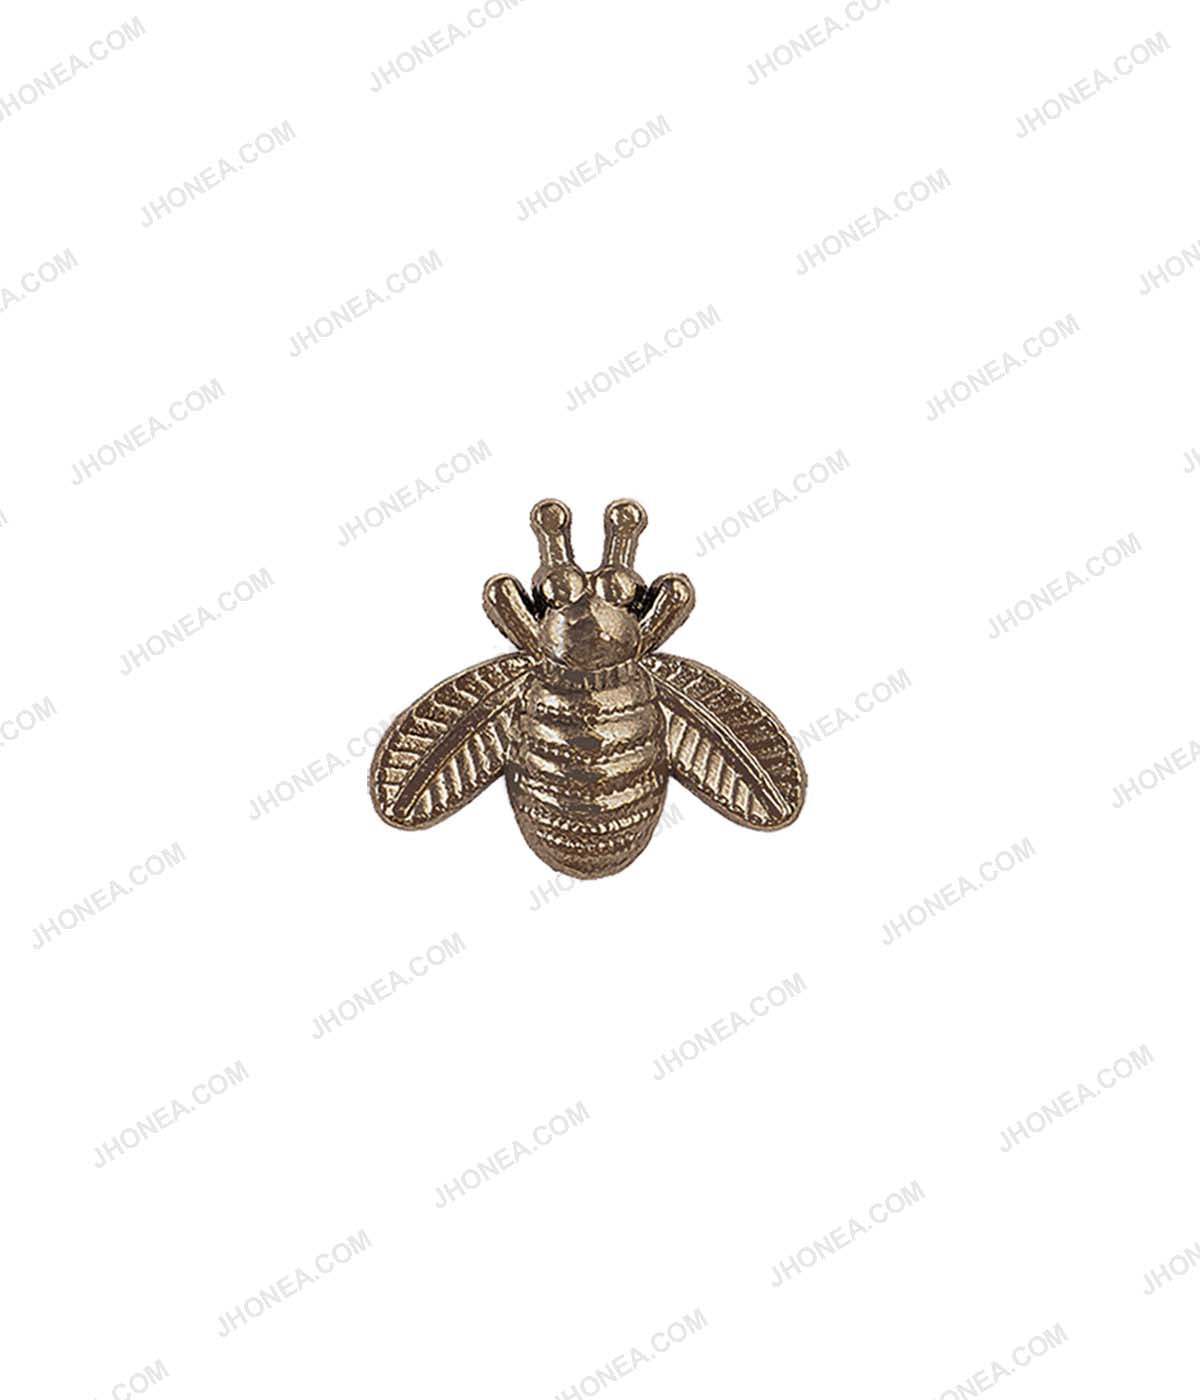 Engraved Honeybee Design Iron On Hot Fix for Suits/Blazers in Gunmetal Color